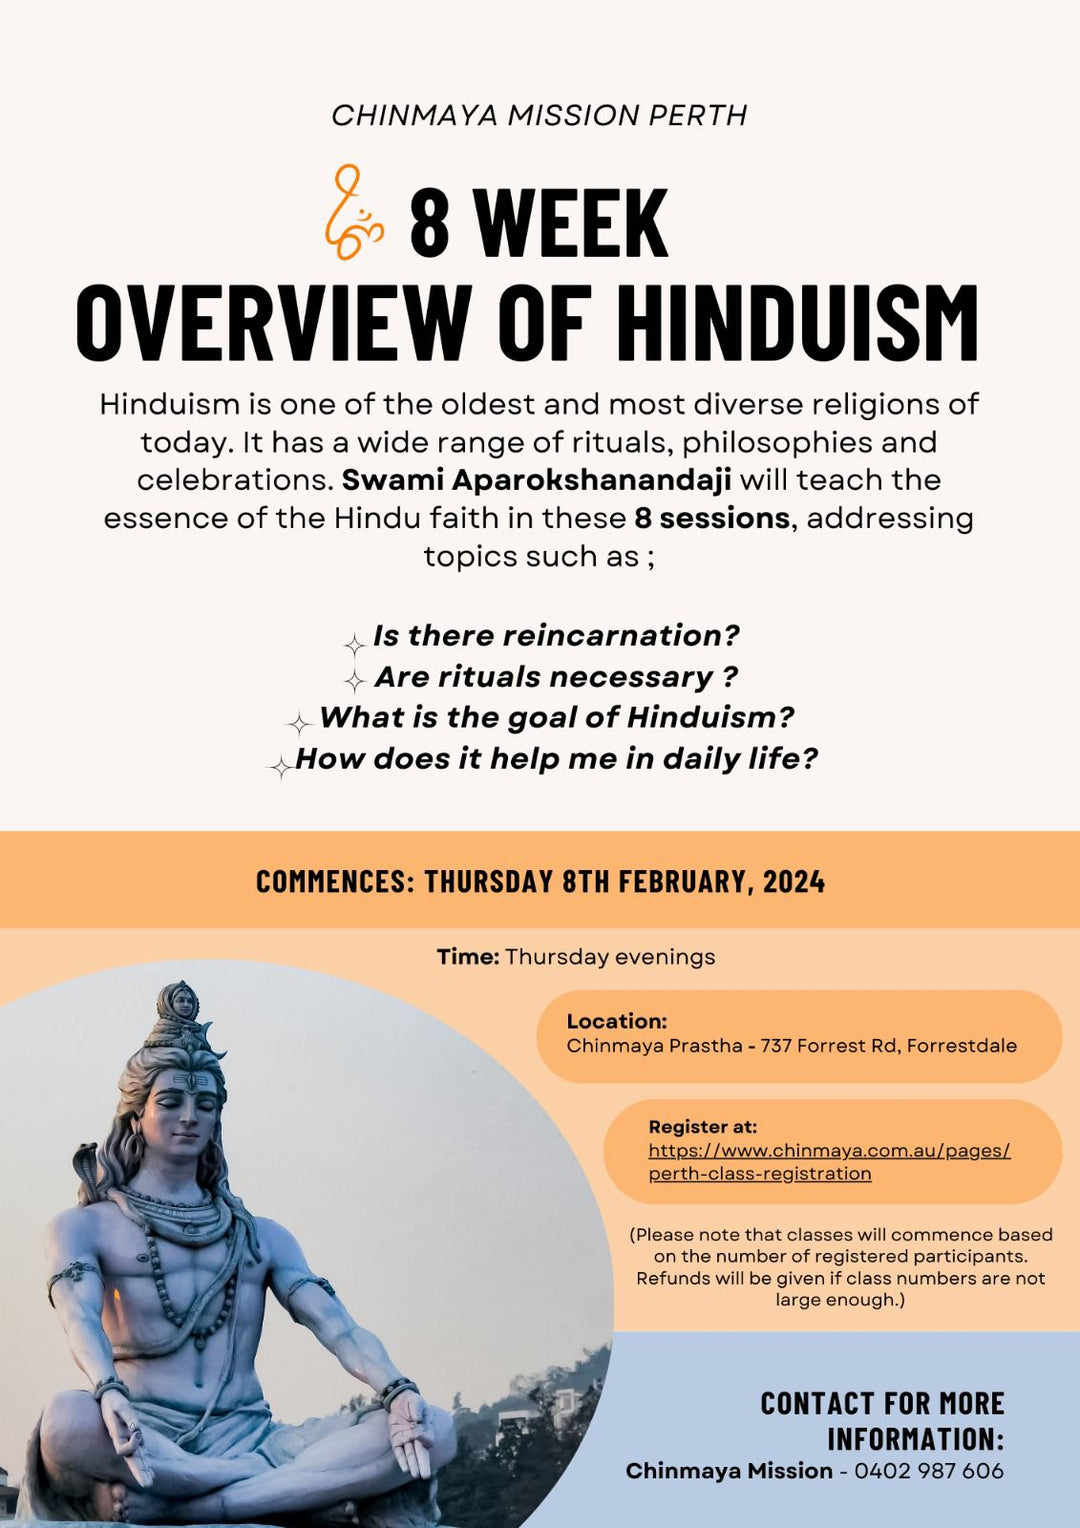 Perth | Overview of Hinduism 2024